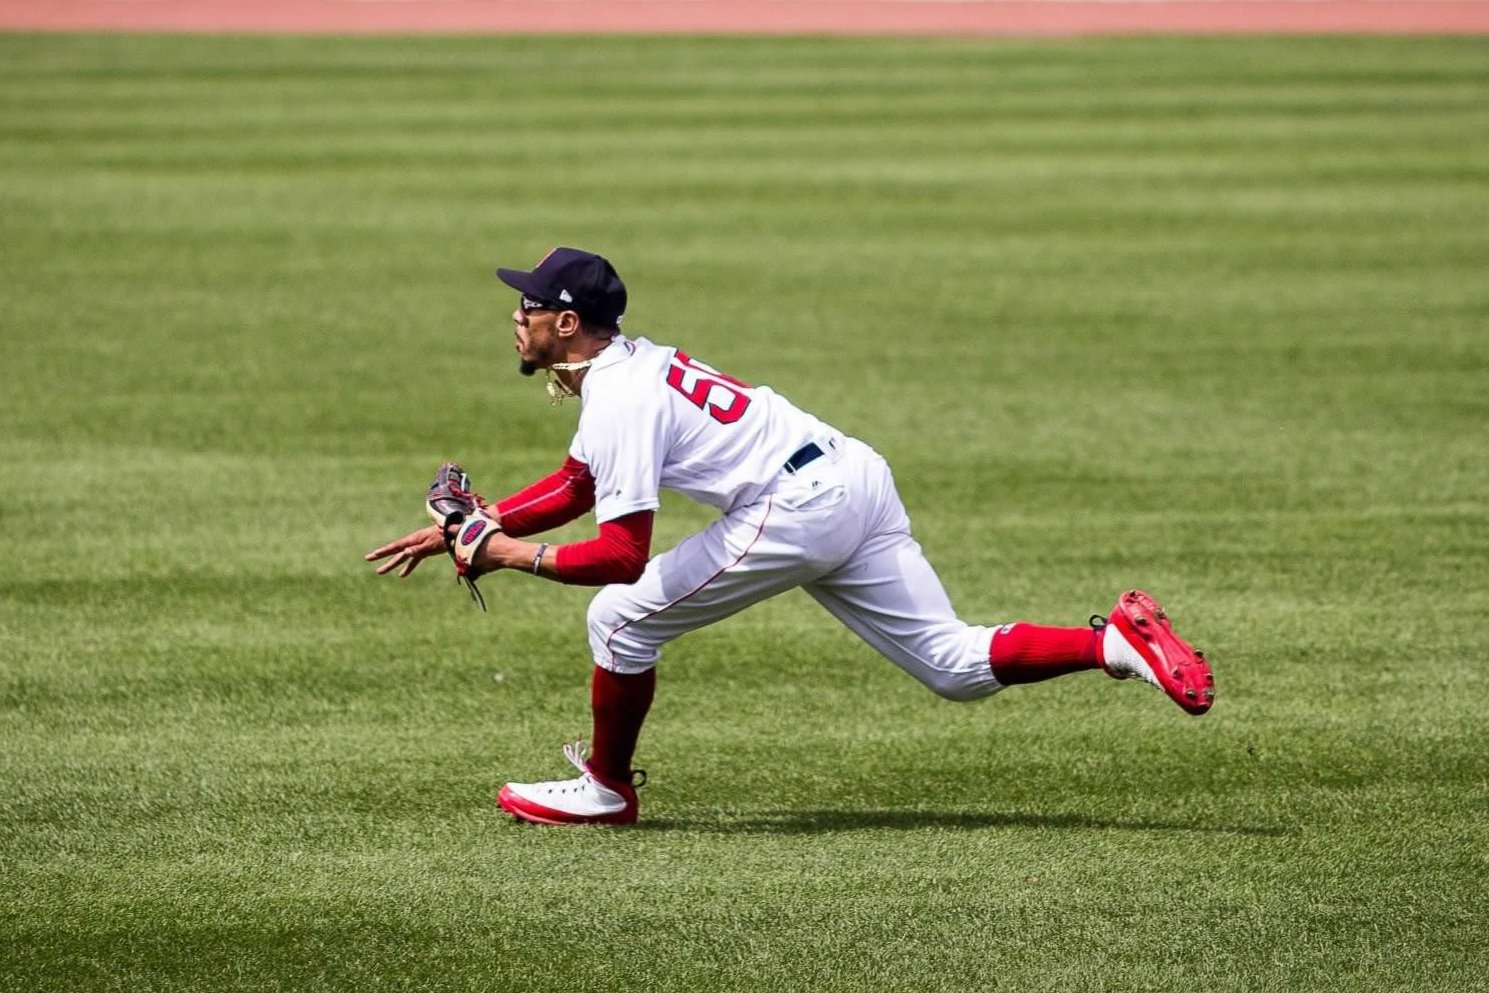 Former Red Sox RF Mookie Betts starts a diving catch, Boston, August 2018.